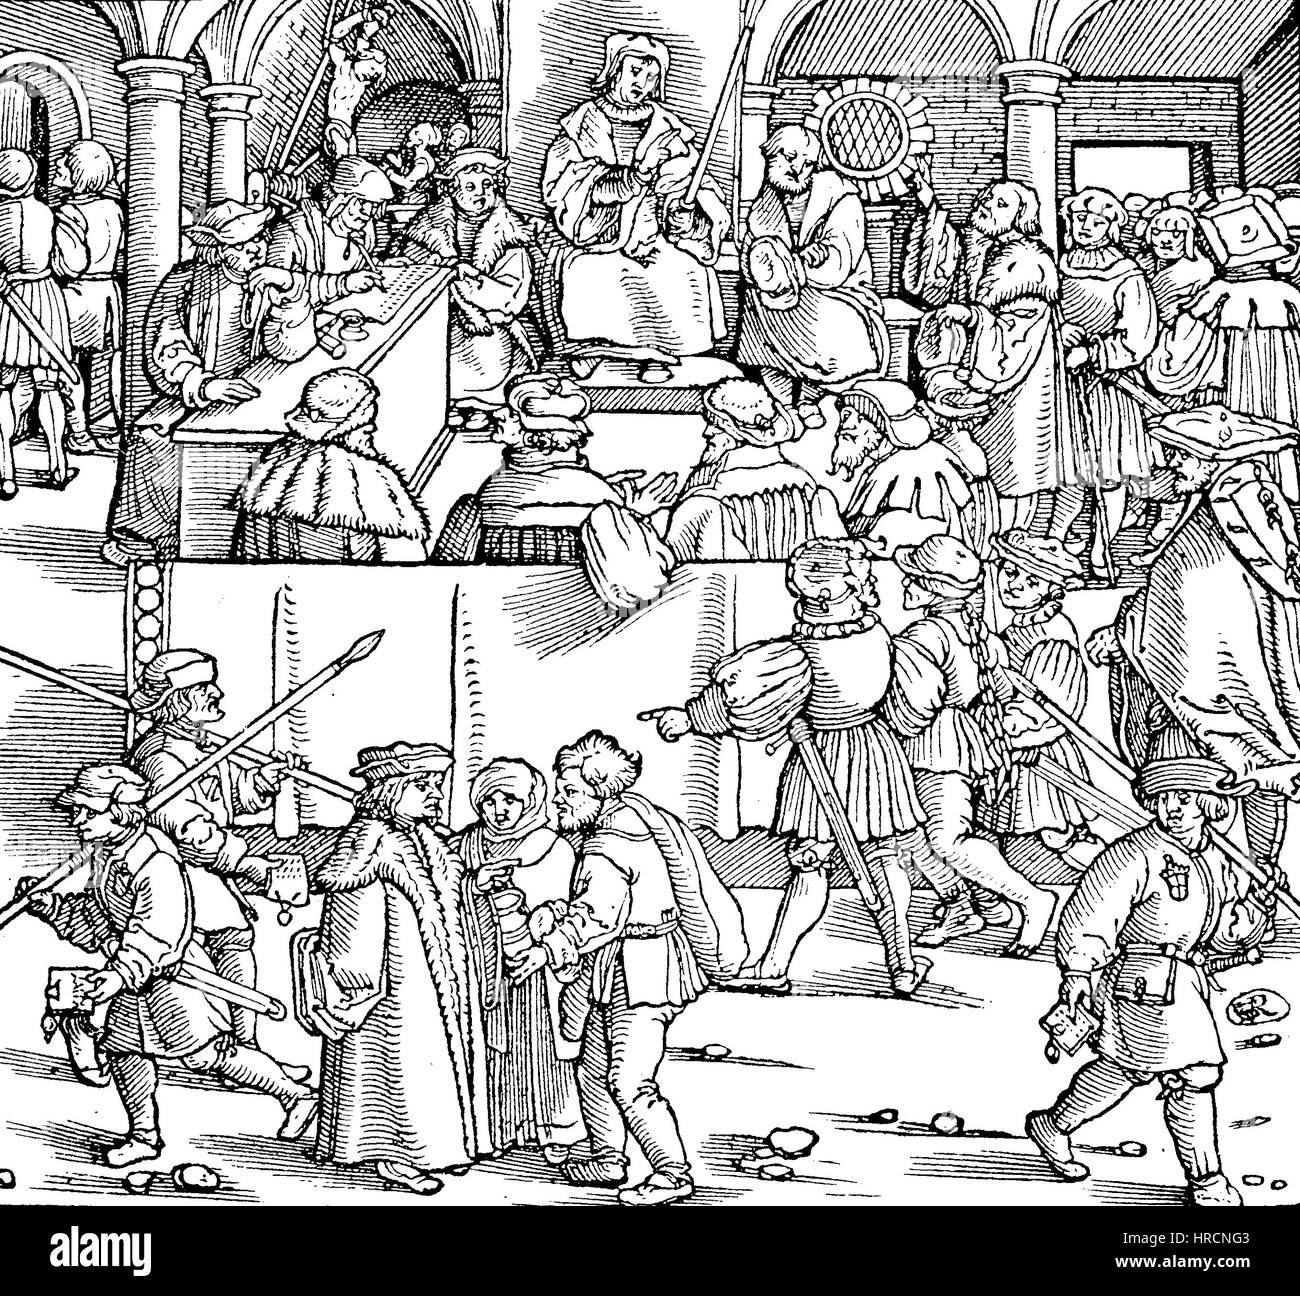 A court ruling, in the foreground the court of justice and in the background on the left it shows the torture, printed about 1530 in Strasbourg, France, Germany. The title of an old court rules book., reproduction of an woodcut from the 19th century, 1885 Stock Photo